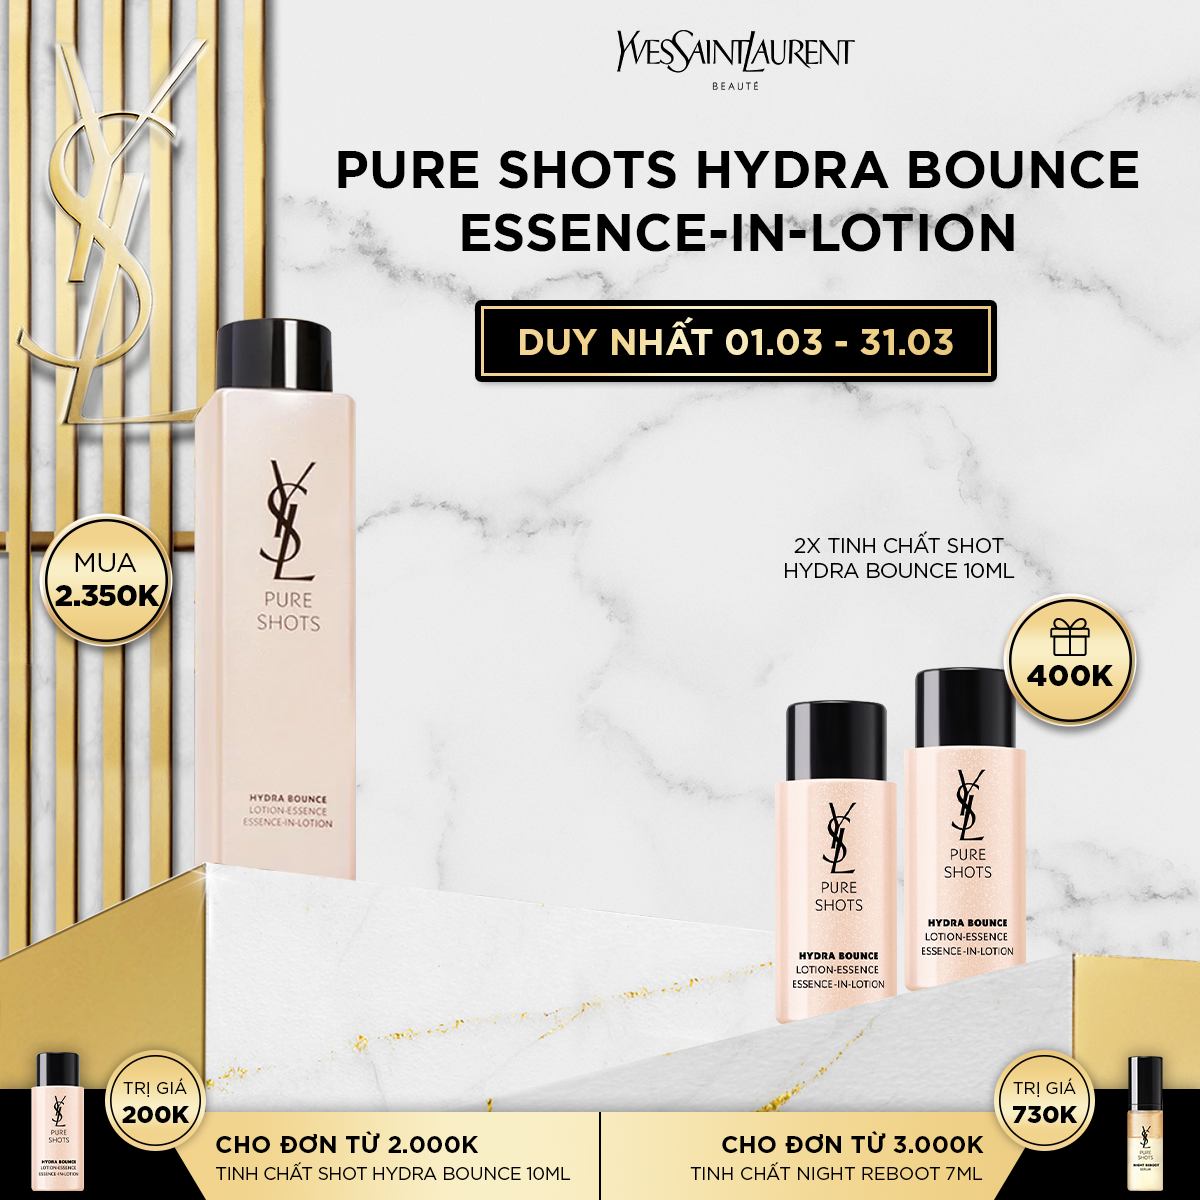 [MAR] Pure Shots Hydra Bounce Essence-in-Lotion